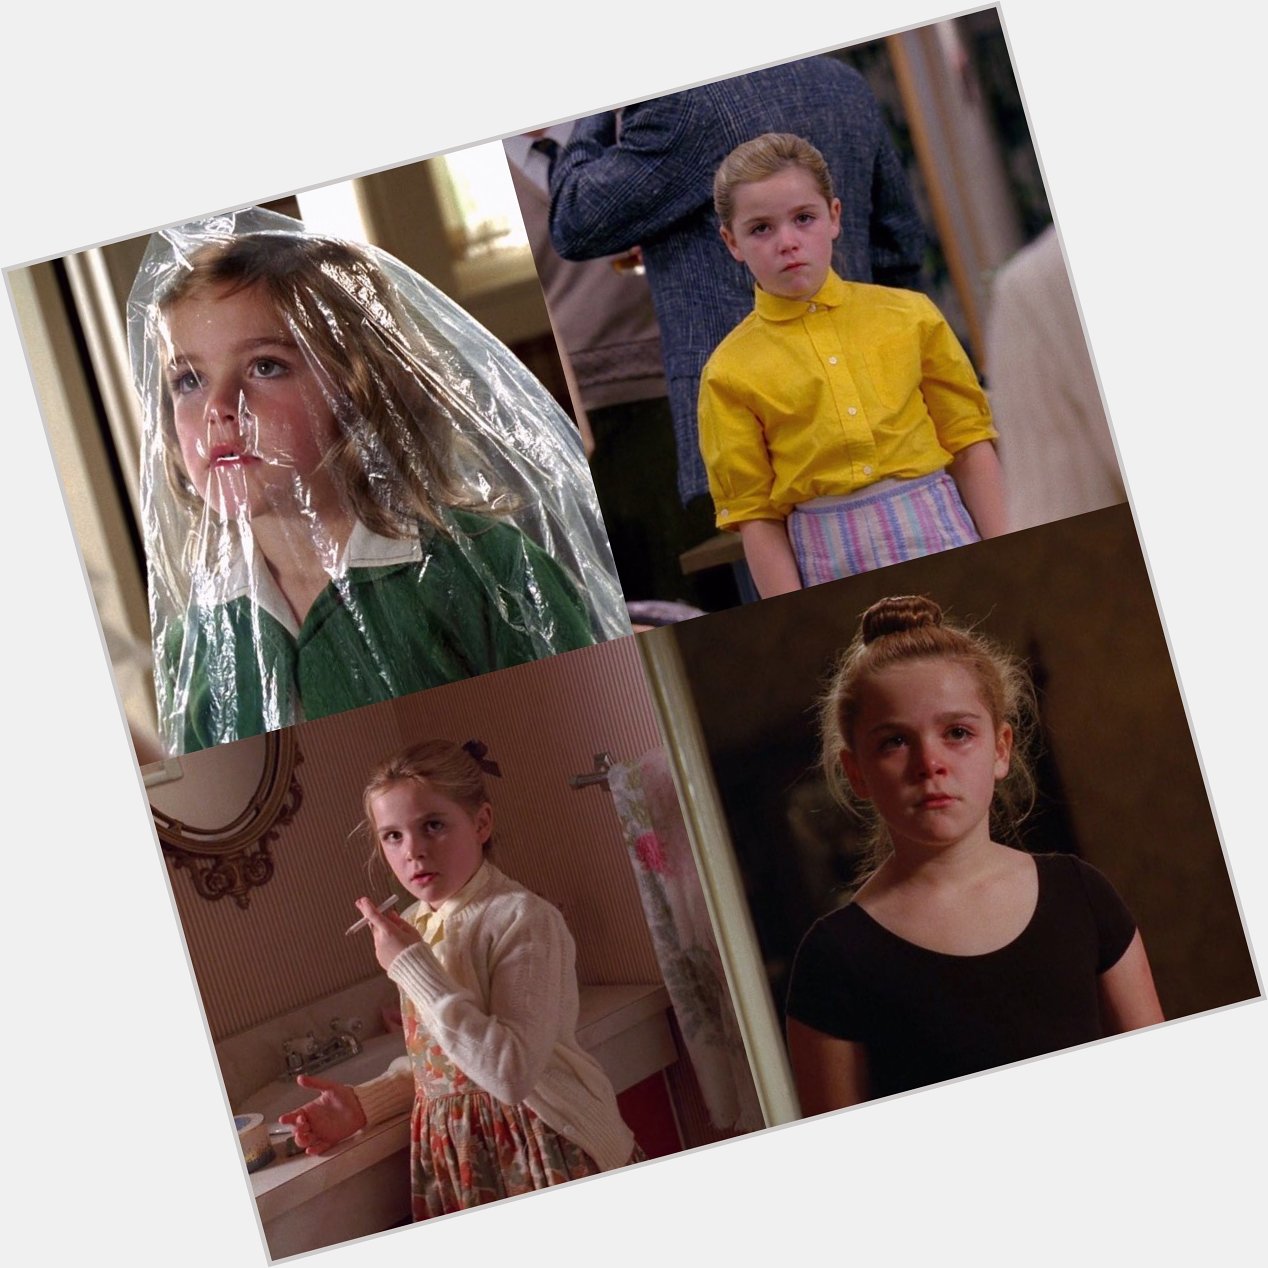 Happy 21st birthday to Kiernan Shipka, who grew up right before our eyes on Mad Men  